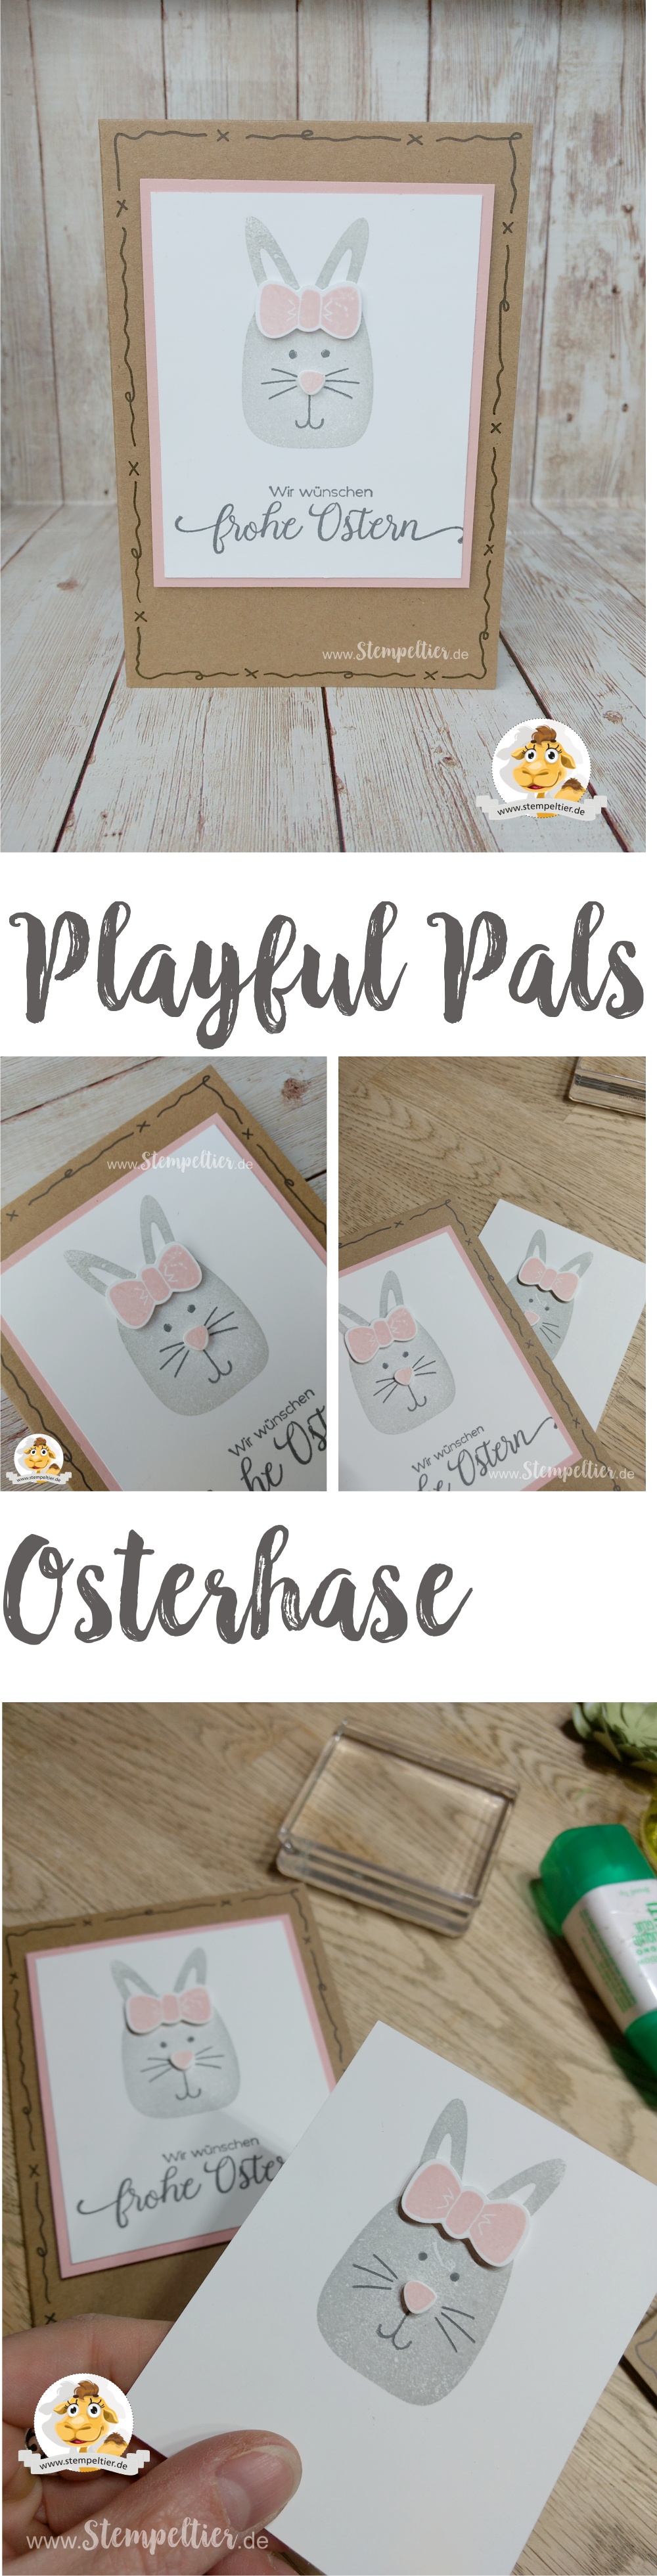 stampin up blog playful pals ostern 2017 easter bunny hase anleitung stempeltier